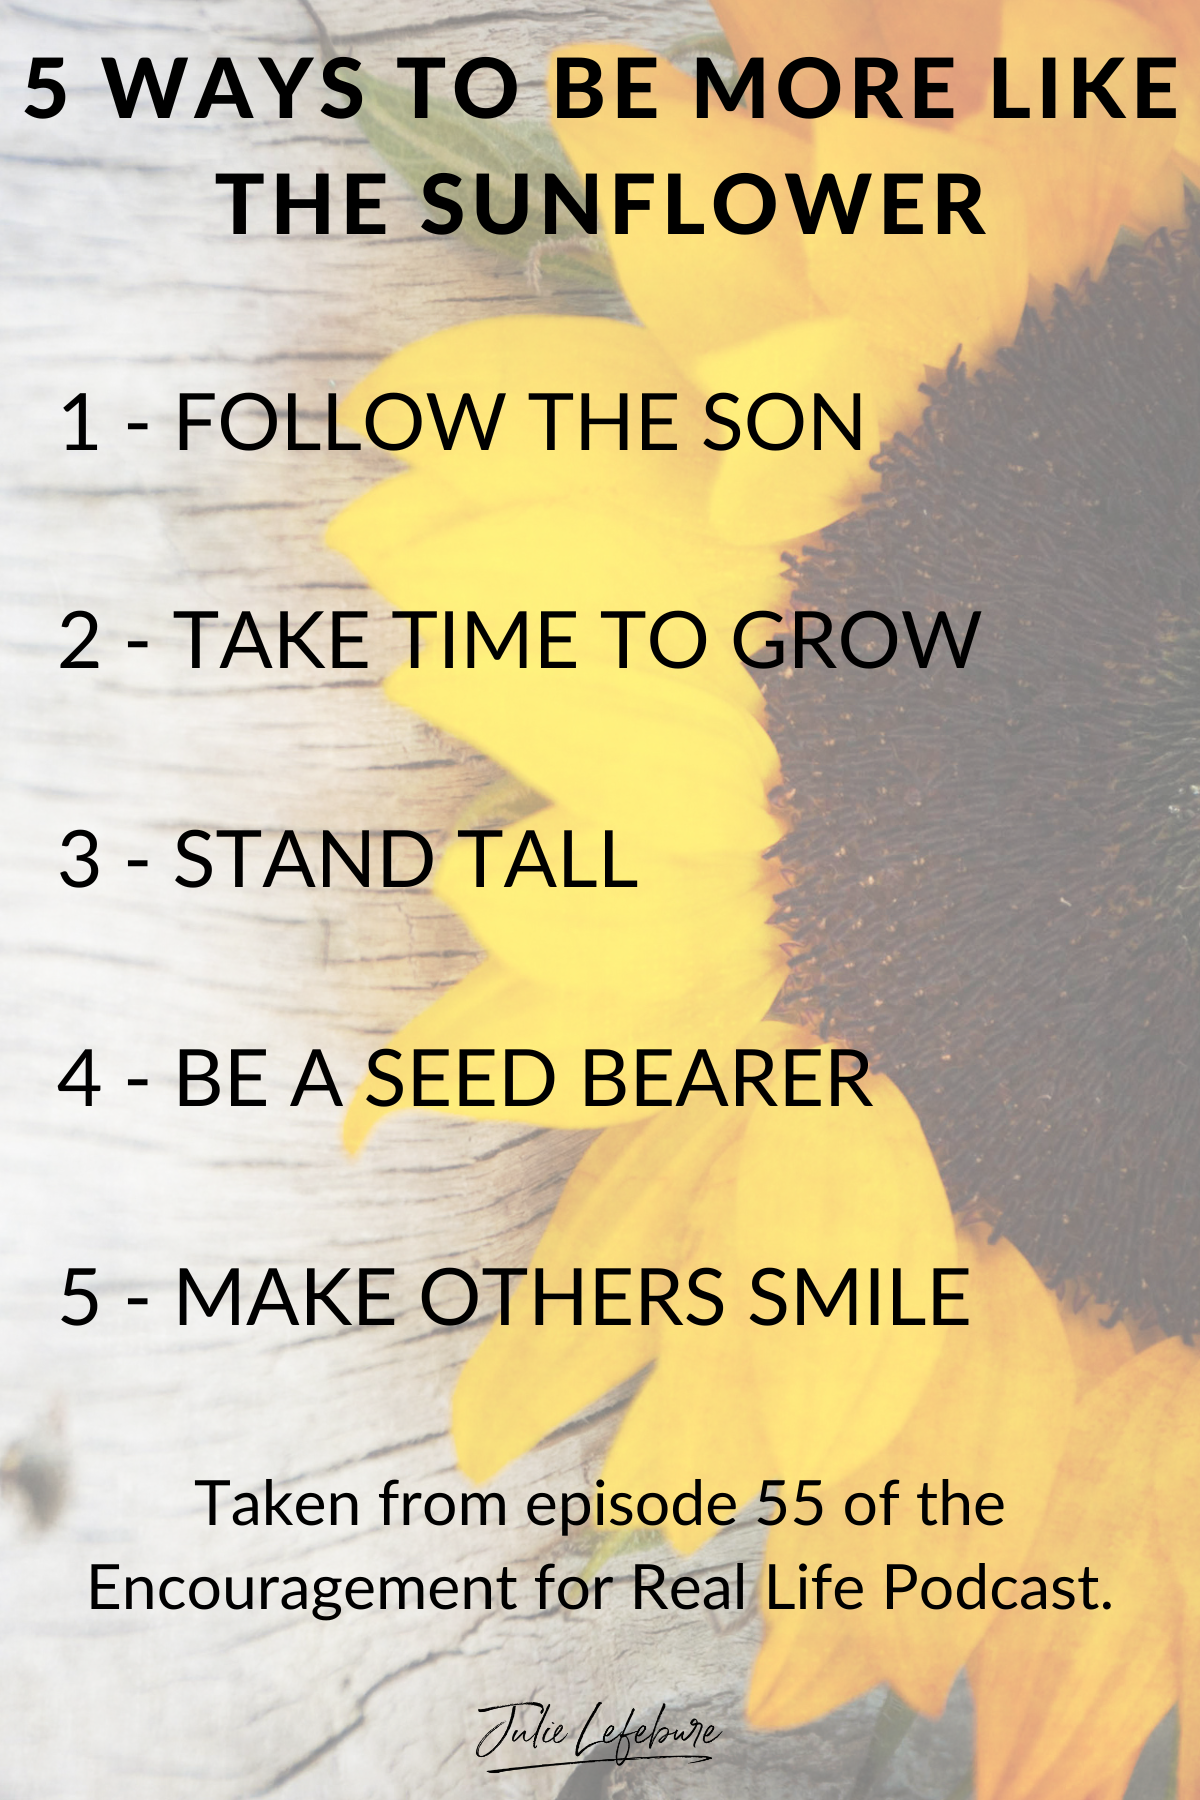 5 Ways to Be More Like the Sunflower | faded sunflower in background